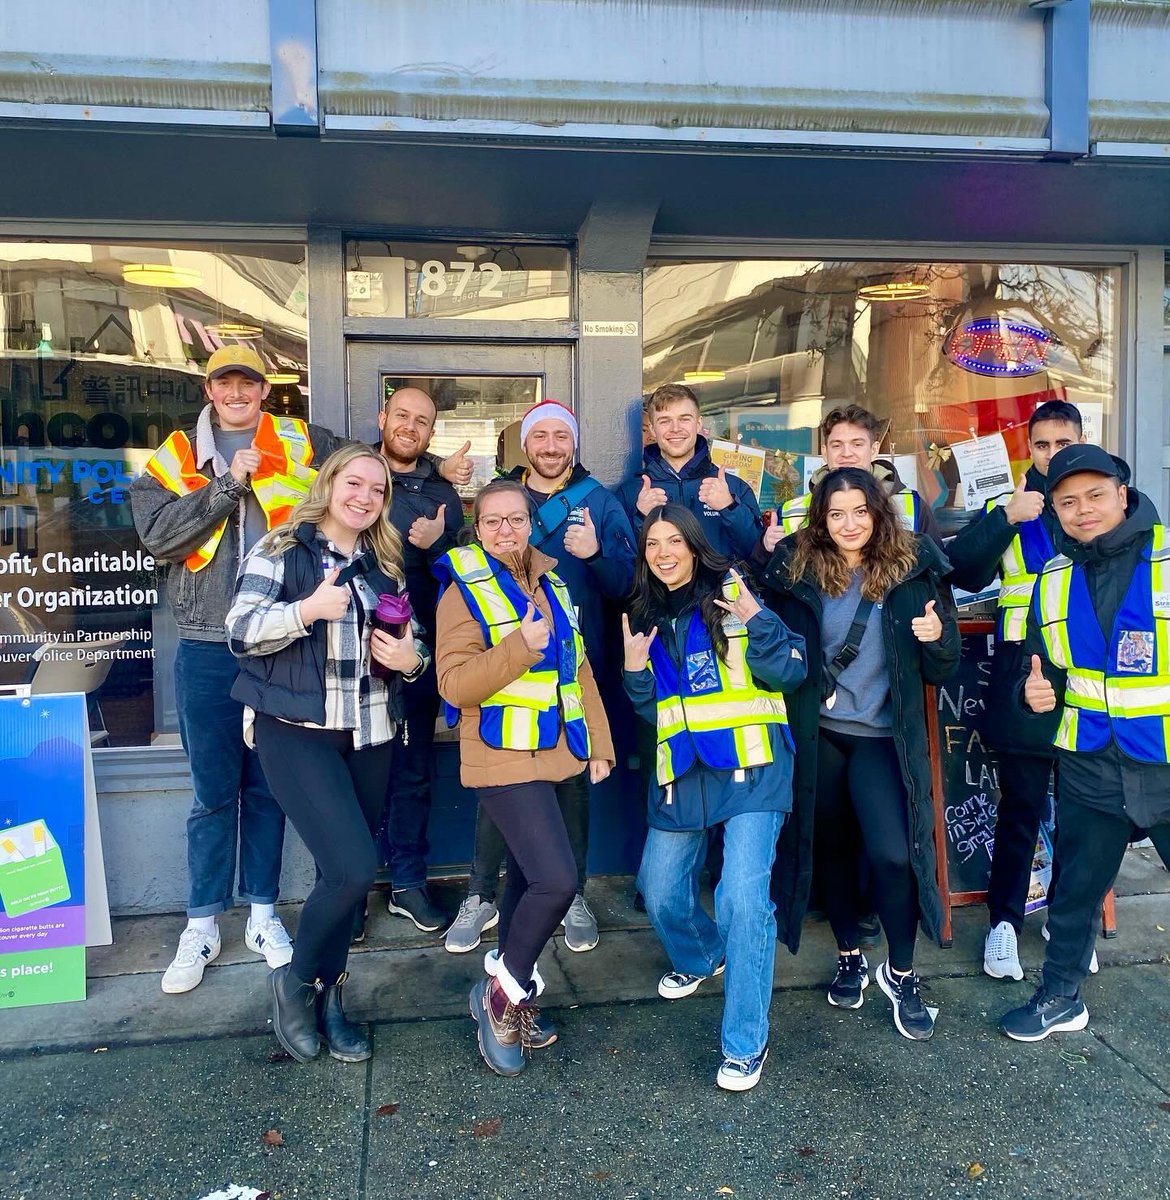 Say hello to our new volunteers! This weekend’s foot patrol and speed watch training was a success! #Volunteers are ready to assist the #Strathcona #community. #vancommunitypolicing #patrols #Community